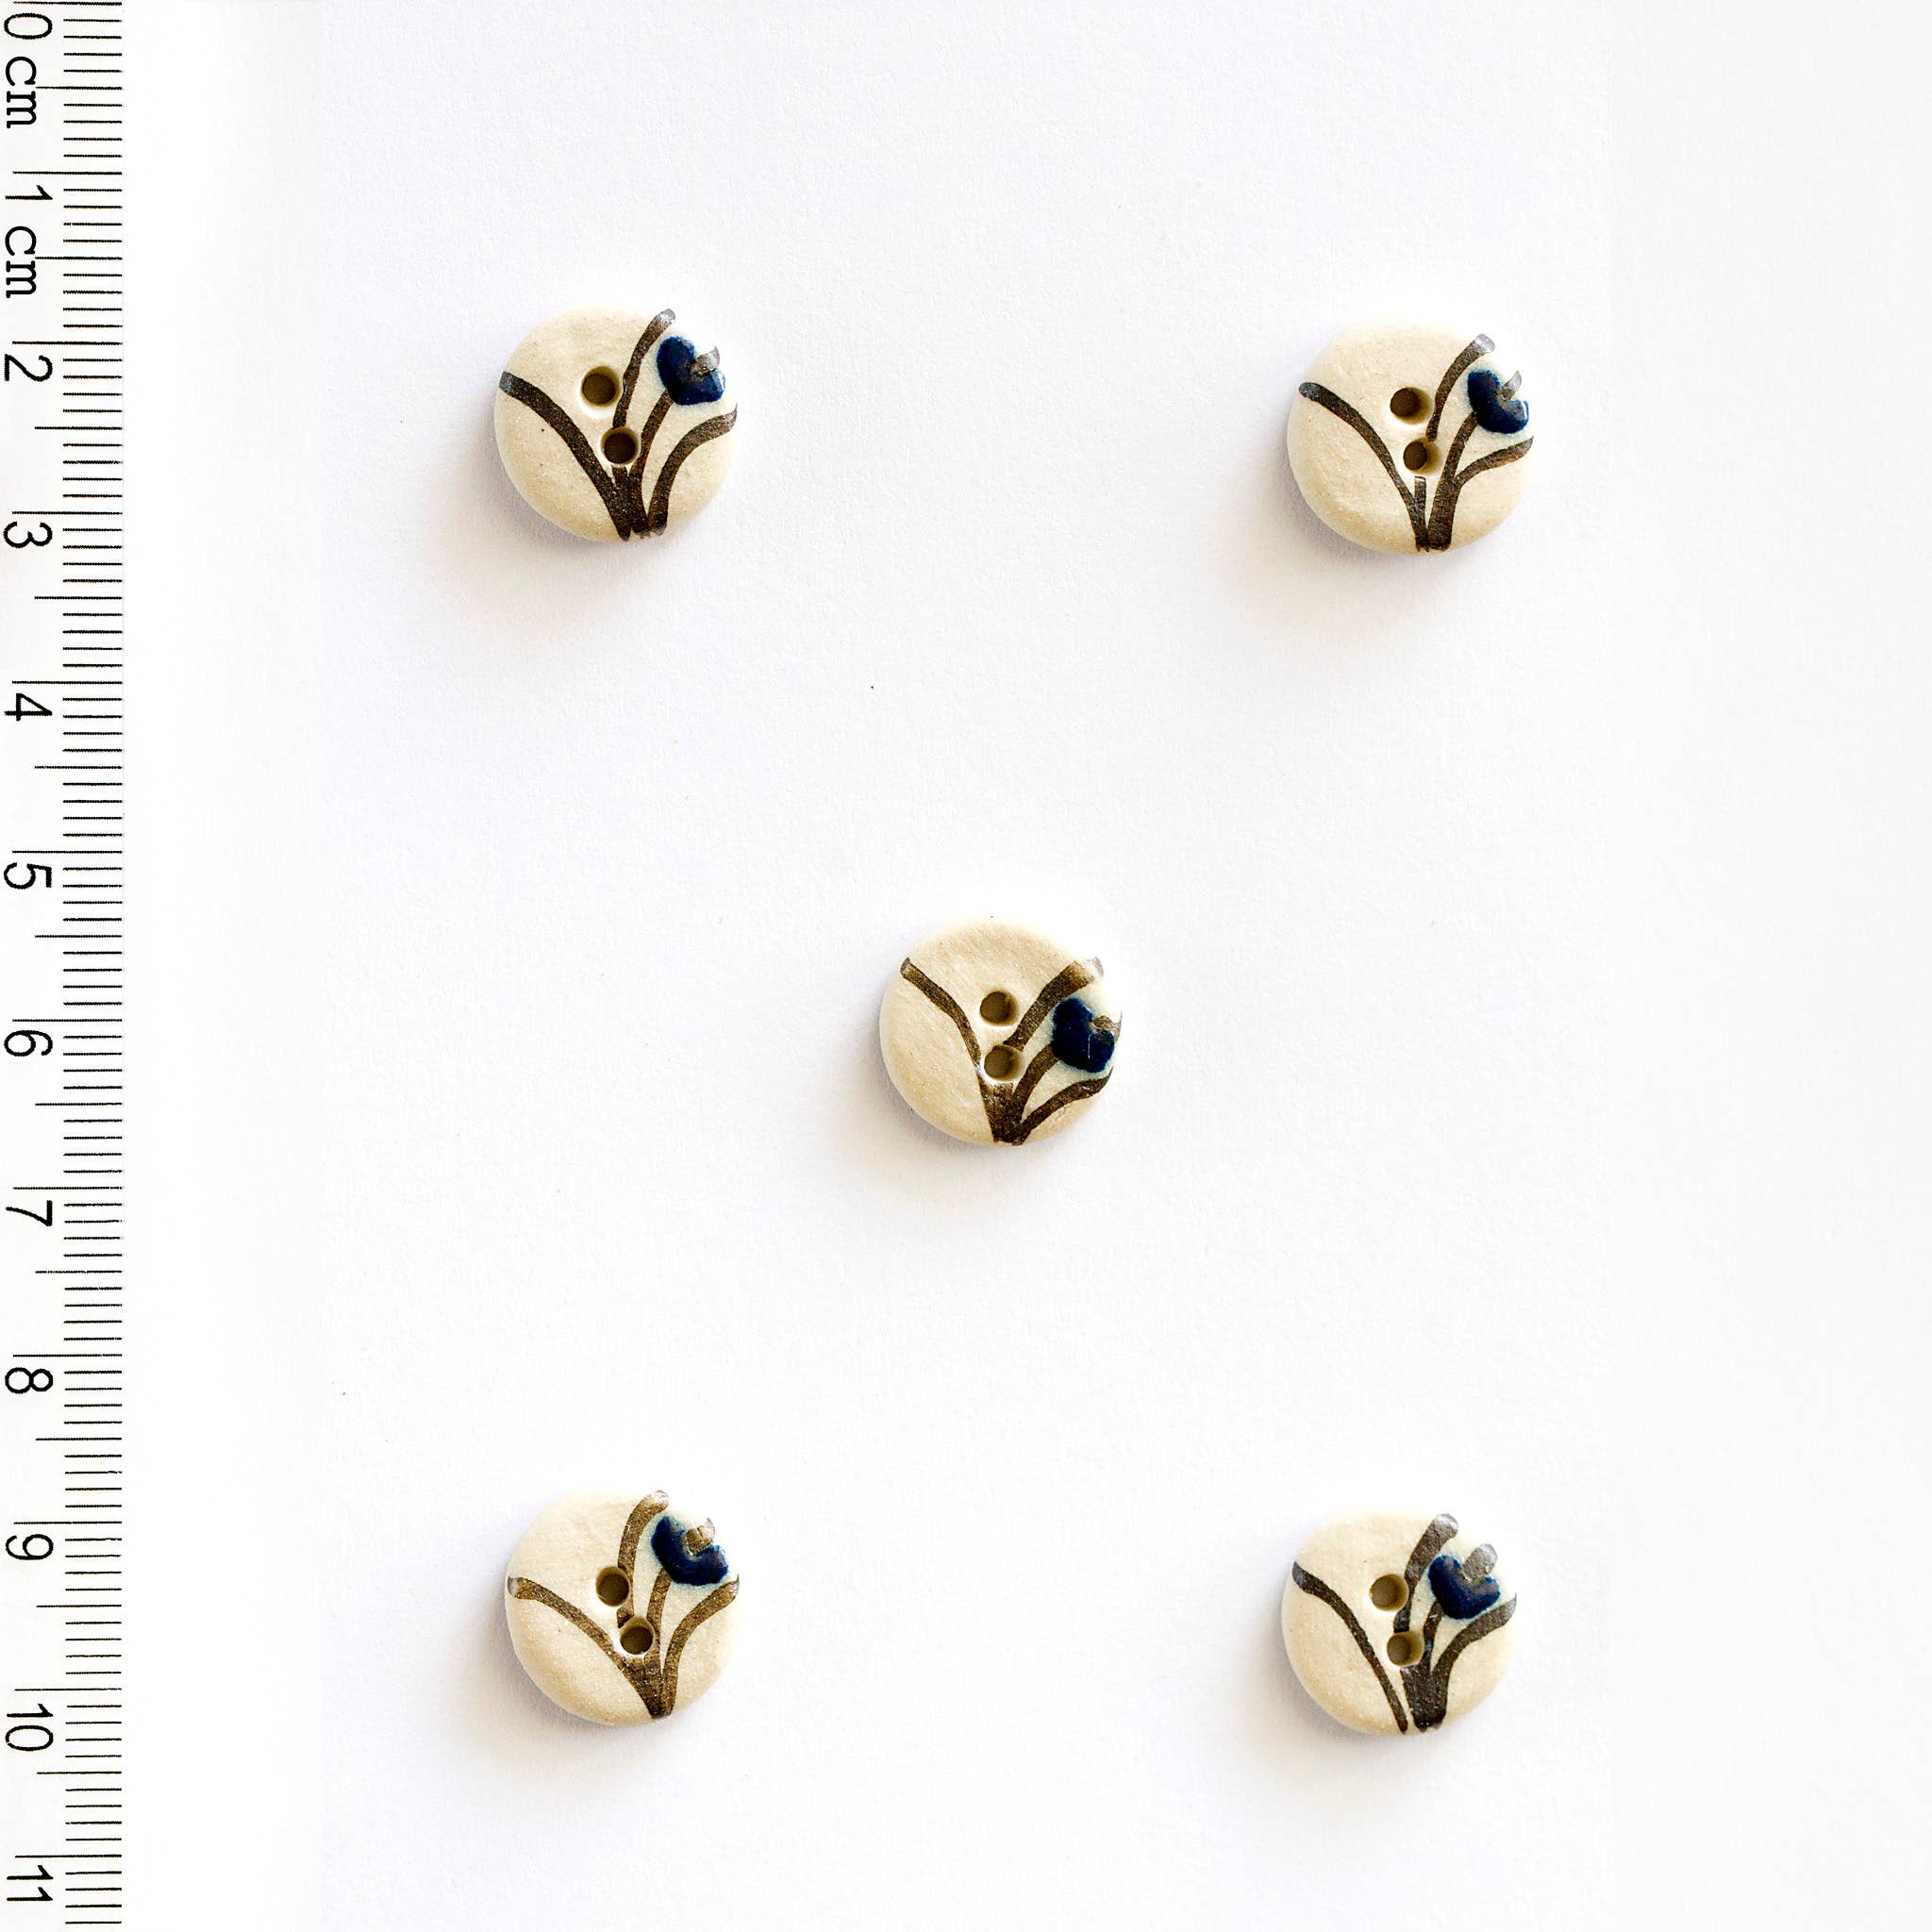 Incomparable Buttons - 5 Floral Grass